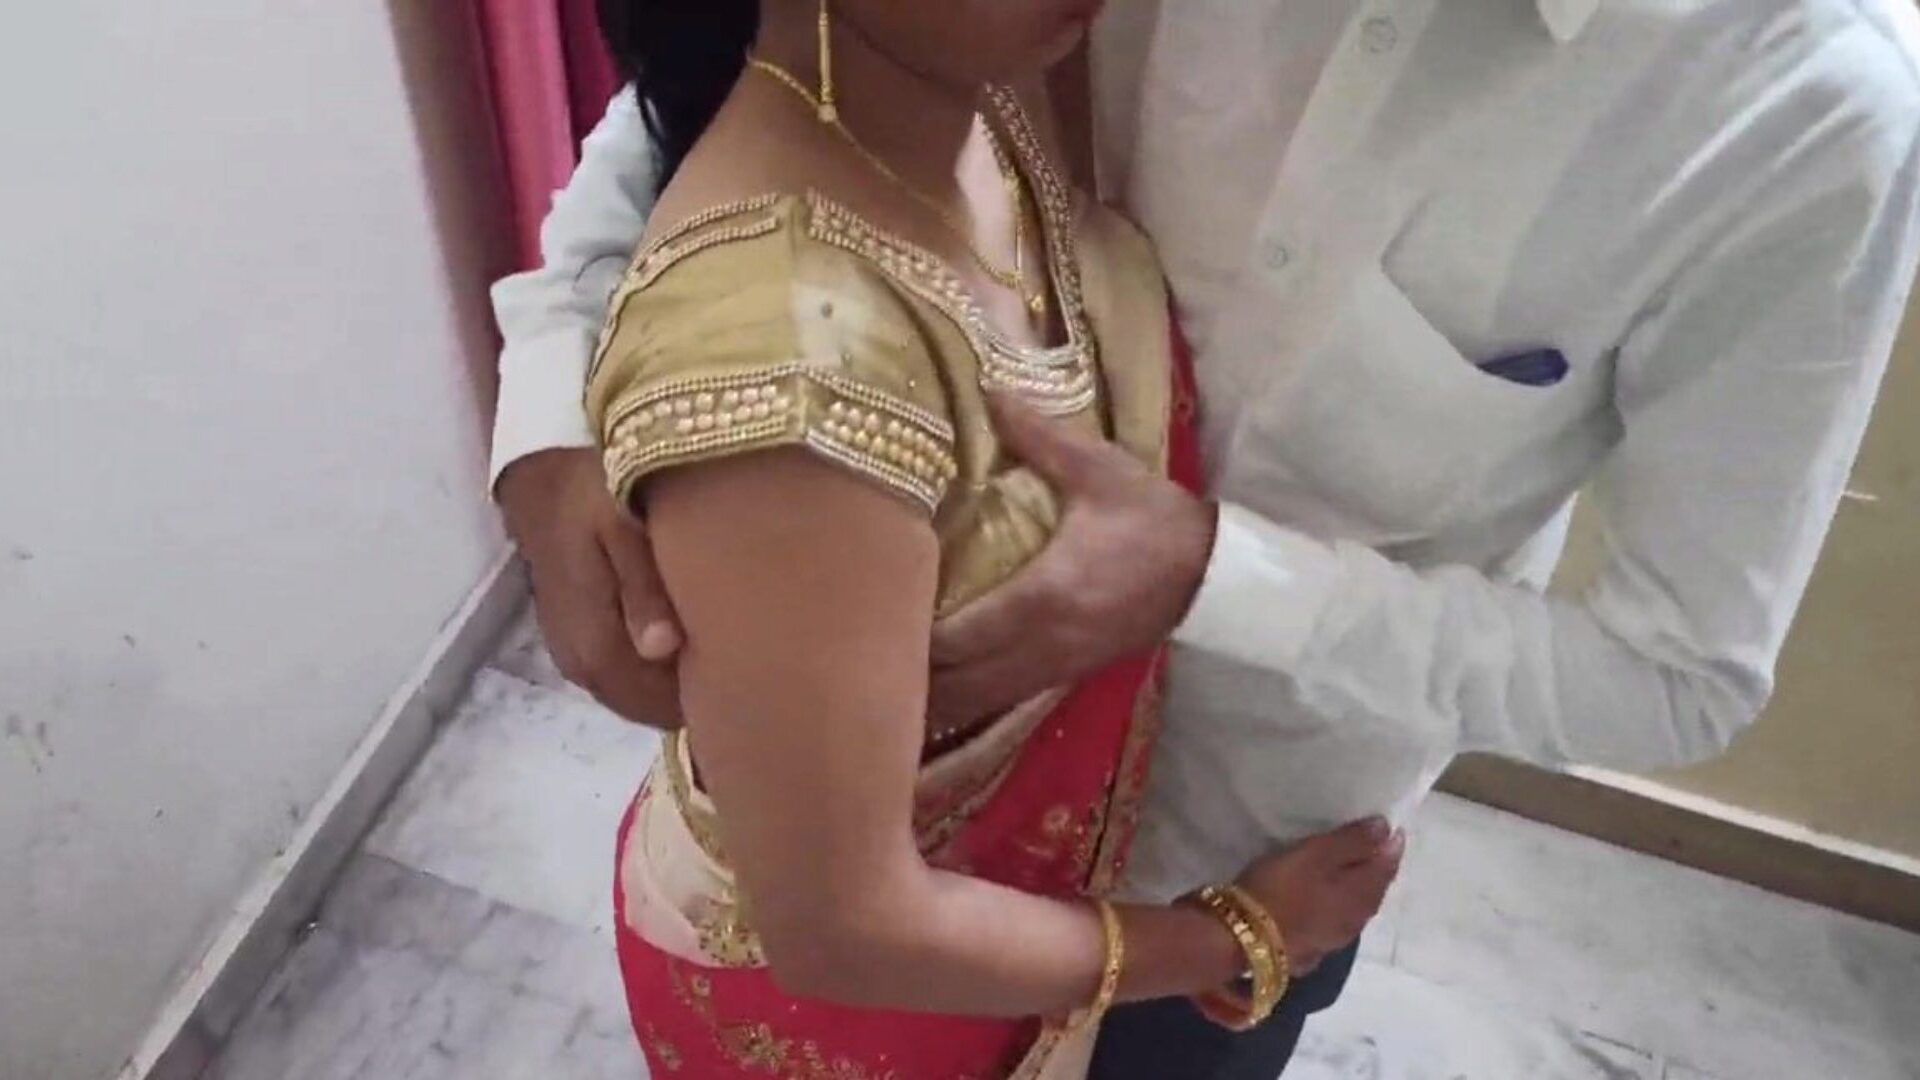 Bhabhi be Dost Ke Sath Romans Sex, Free Porn 29: xHamster Watch Bhabhi be Dost Ke Sath Romans Sex movie on xHamster, the giant HD hookup tube website with tons of free-for-all Indian Sex Xxx Tube & Sex Xxx Xnxx pornography movies